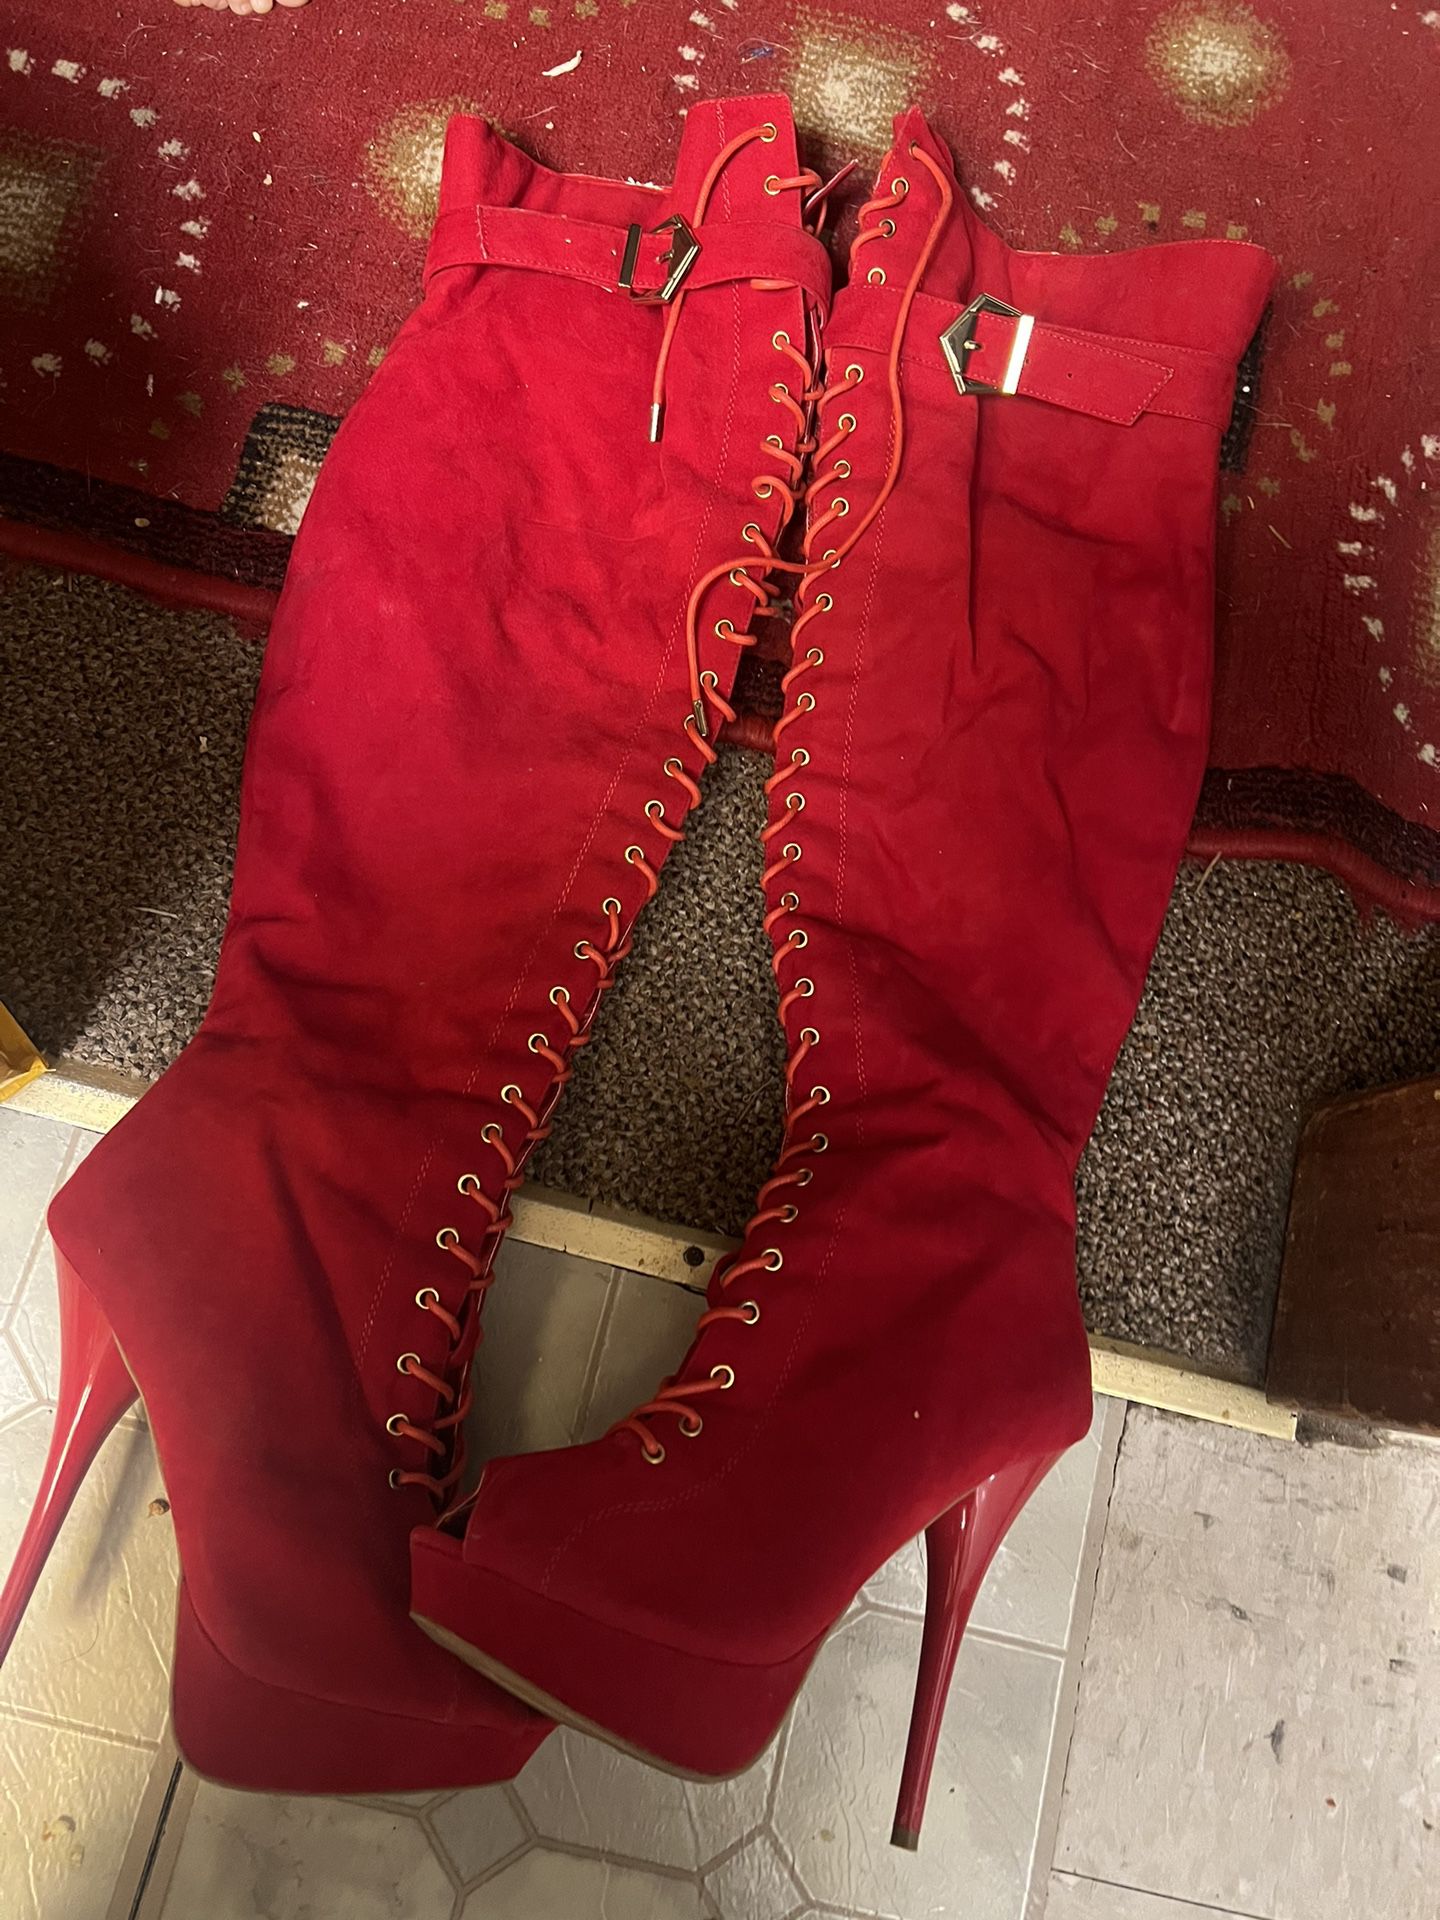 Thigh high Boots Size 9